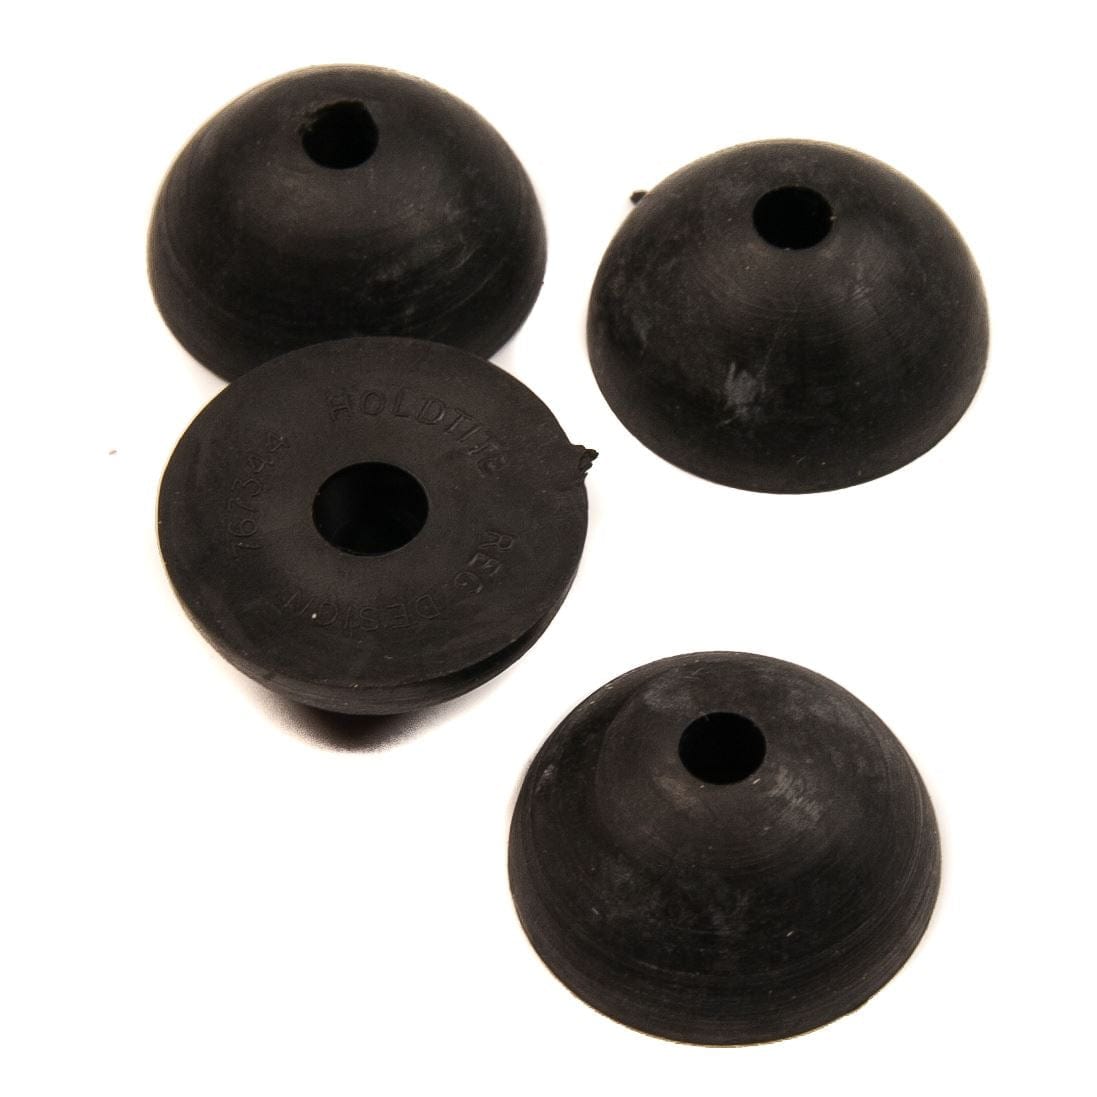 Dome Rubber Tap Washer 5/8" BSP Replacement 20mm Diameter (Pack of 4) Tap Washers Thunderfix 100406